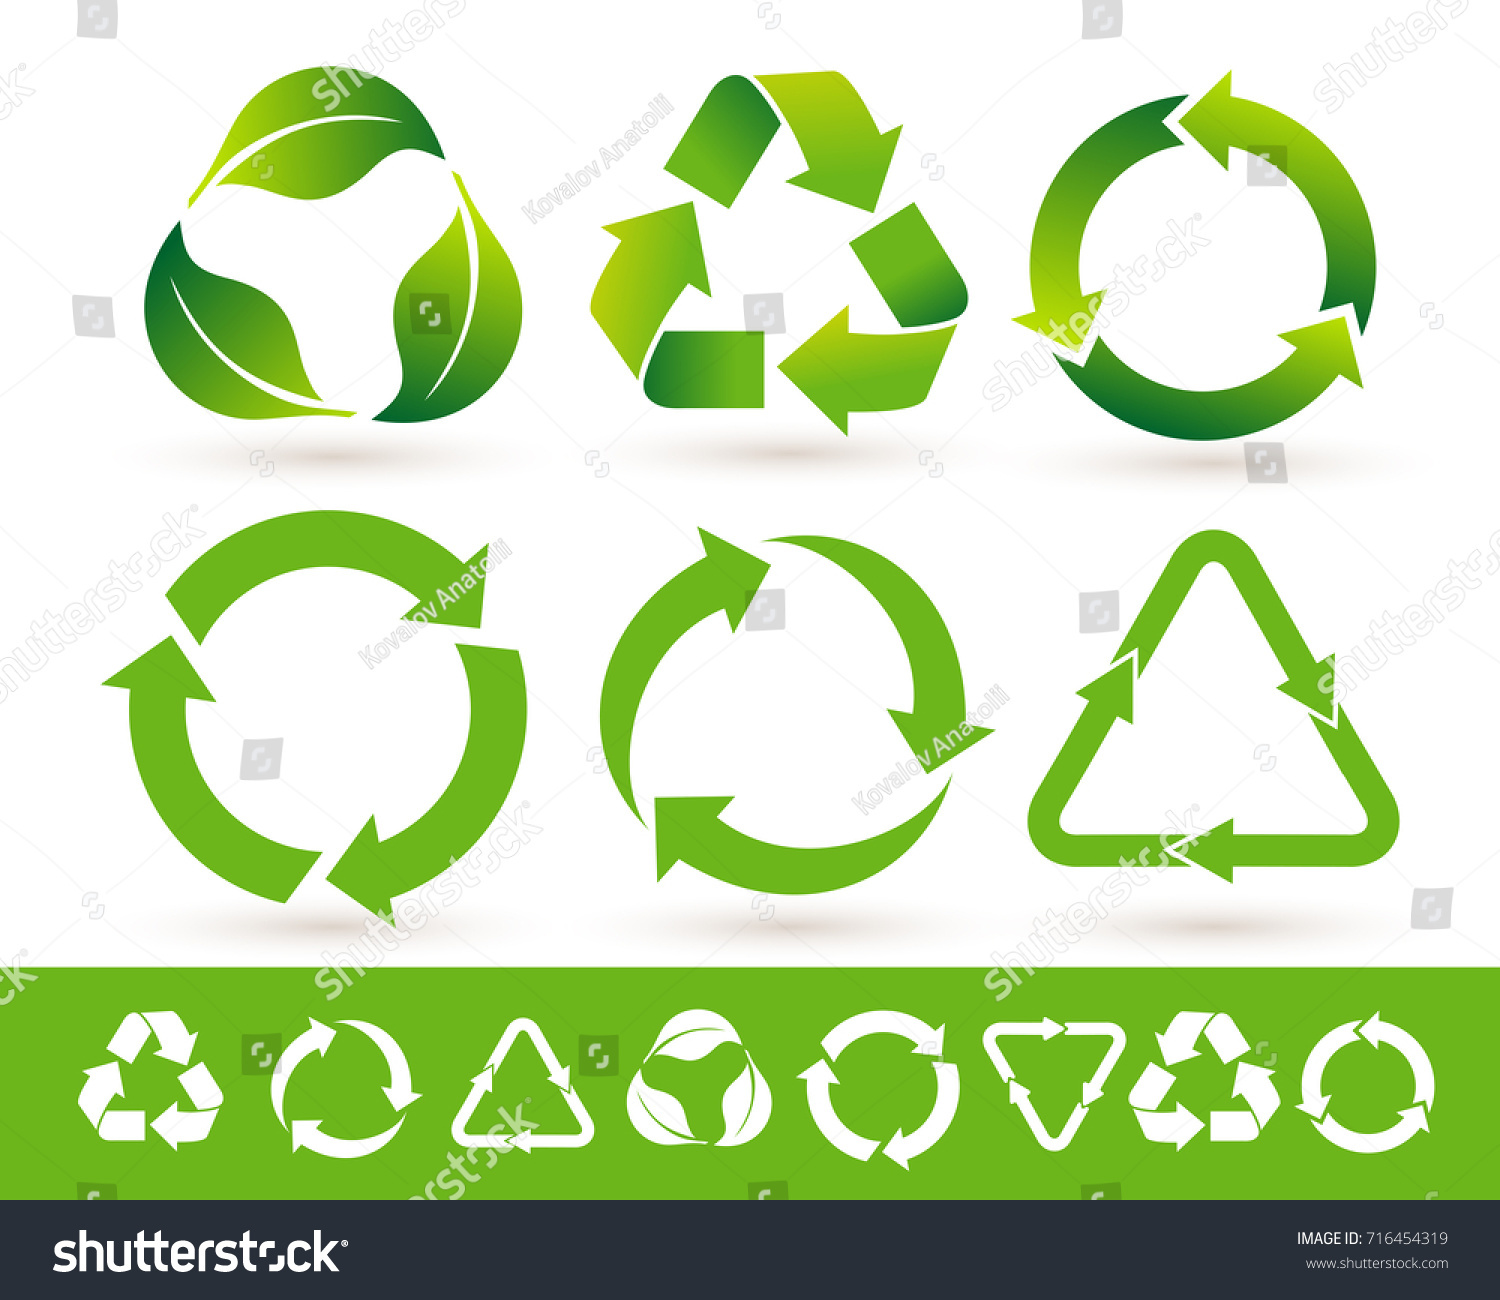 Recycled cycle arrows icon set. Recycled eco icon. Vector illustration. Isolated on white background #716454319